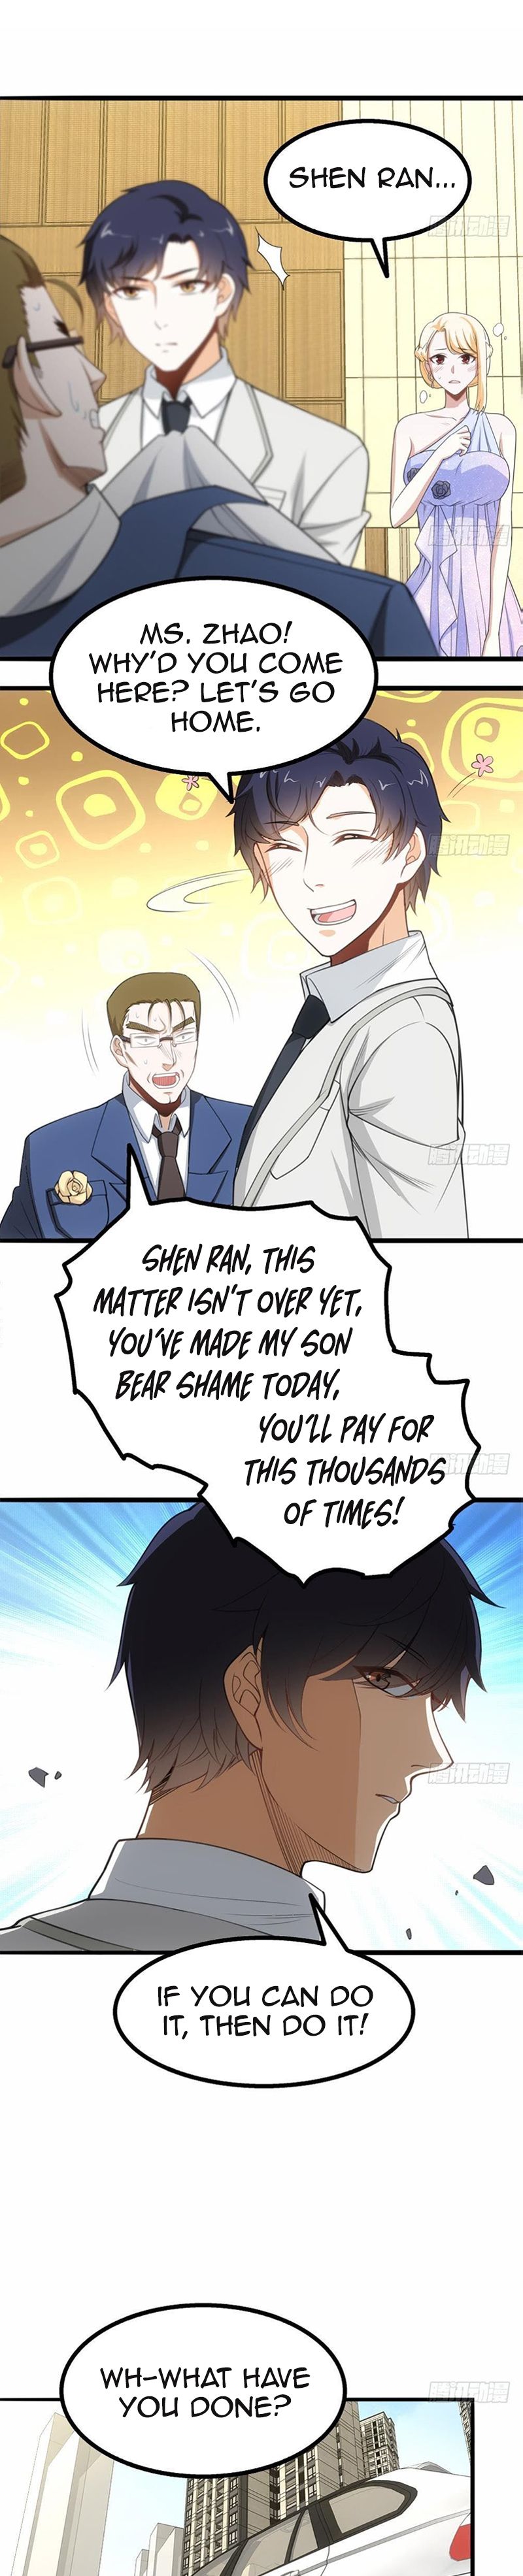 Strongest Son In Law - Page 2